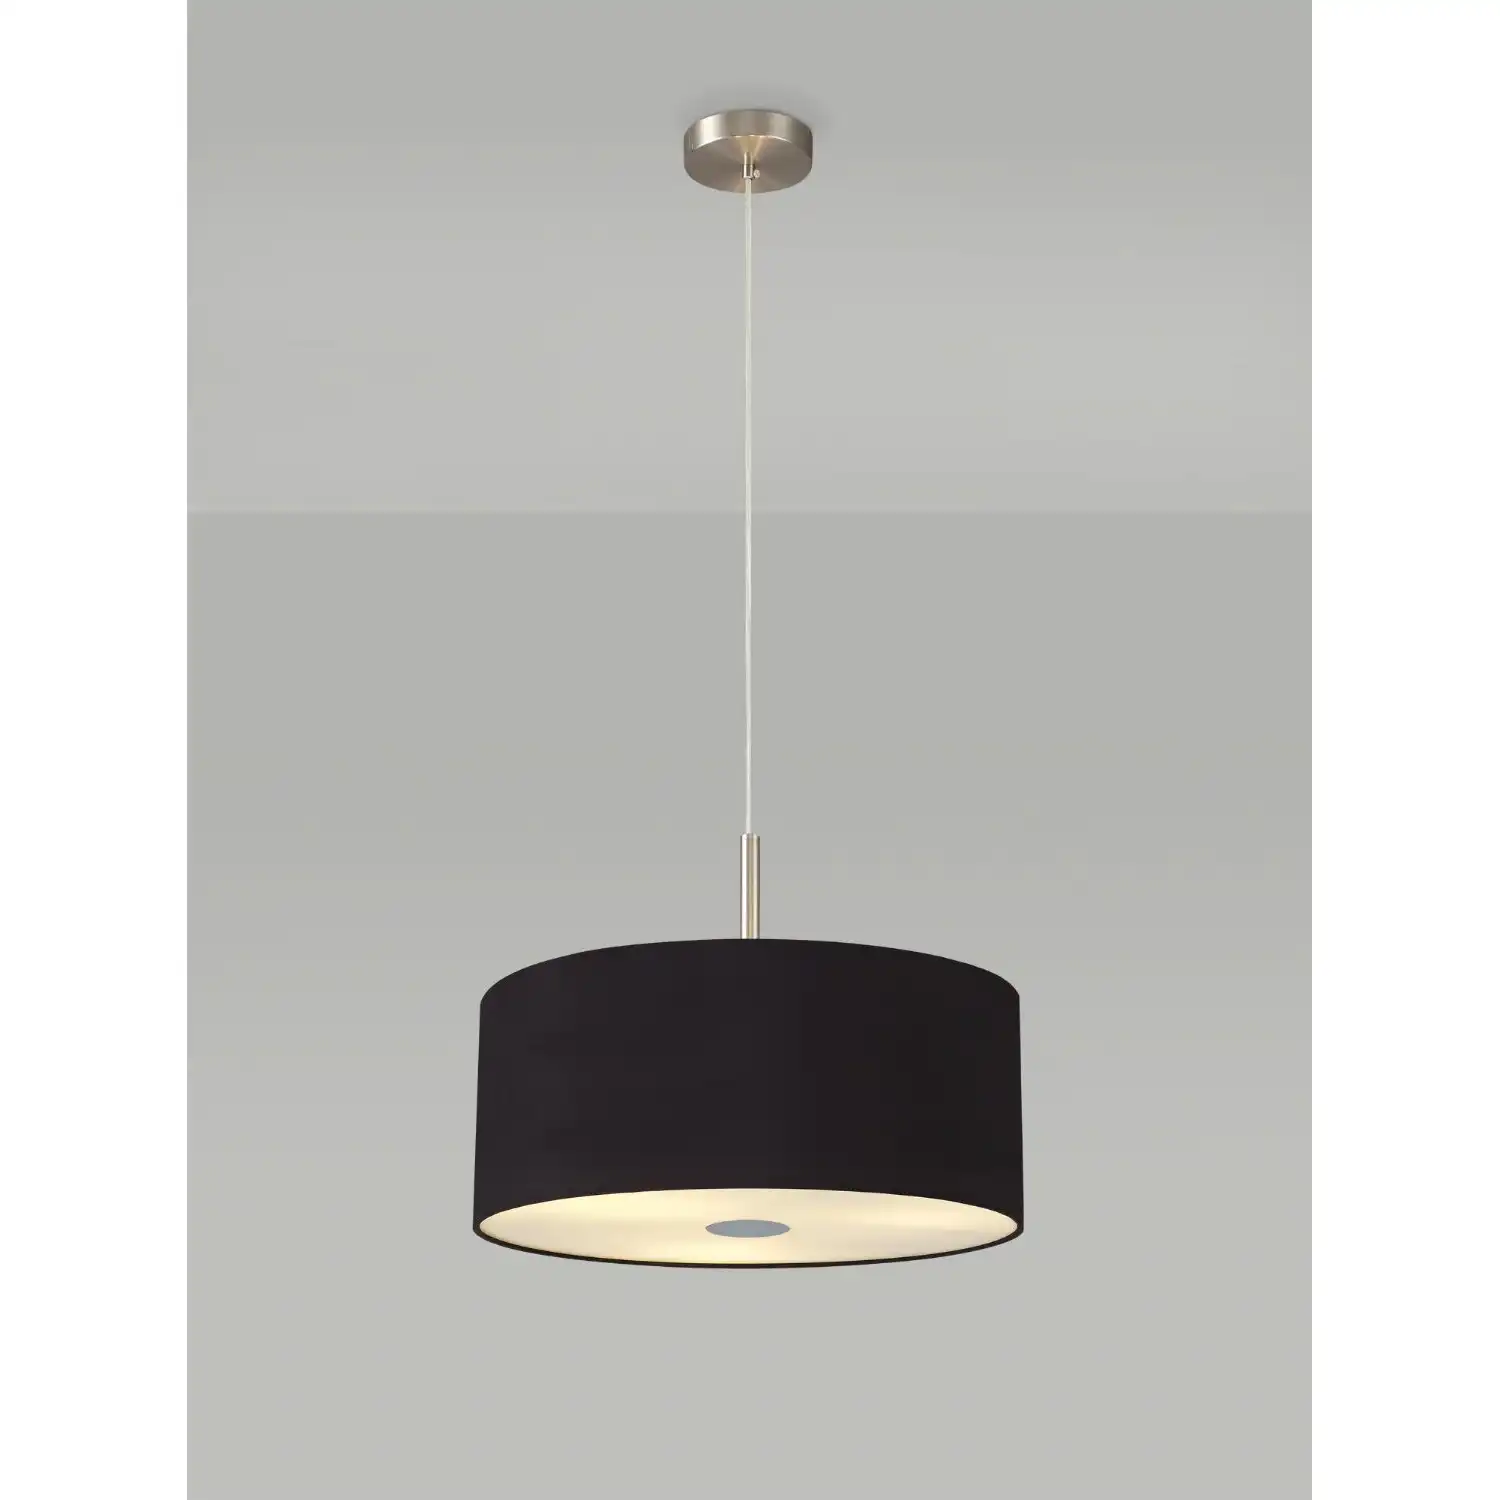 Baymont Satin Nickel 3m 3 Light E27 Single Pendant c w 400 Dual Faux Silk Fabric Shade, Midnight Black Green Olive And 400mm Frosted PC Acrylic Diffuser